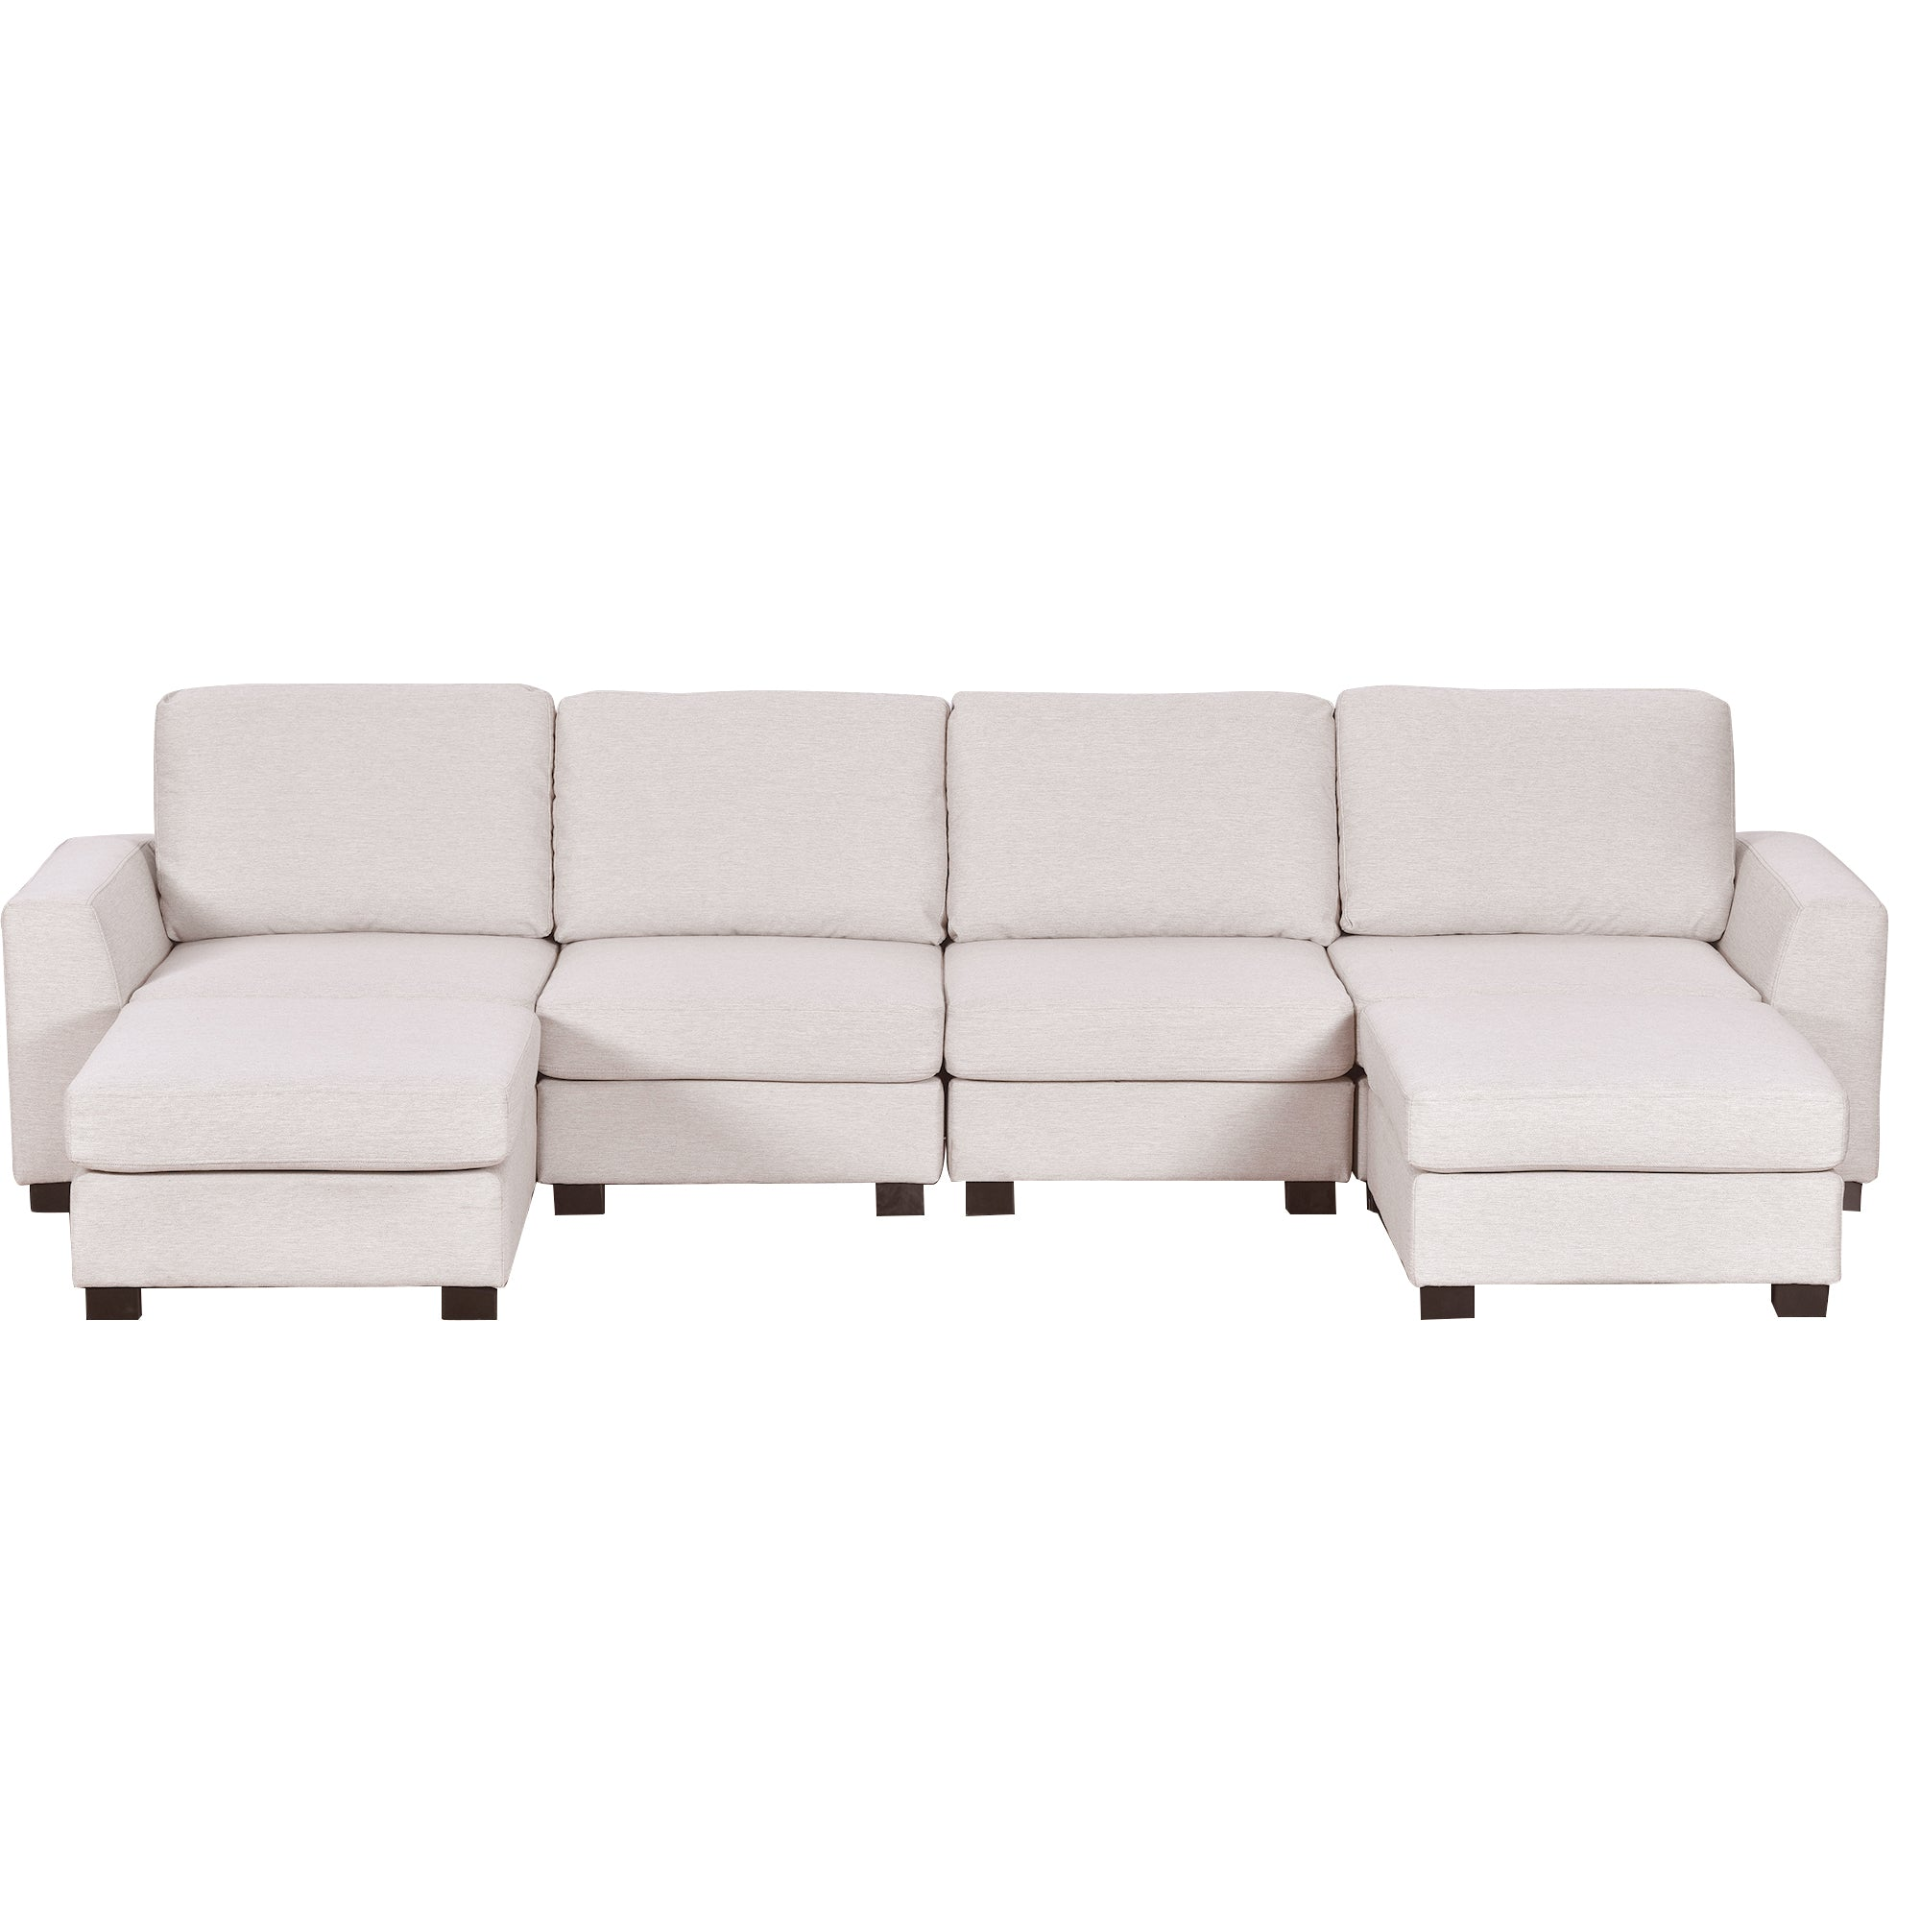 3 Pieces U shaped Sofa with Removable Ottomans - 33943178_large_b59f0340-da7f-434f-bbbe-8f24d86bd756